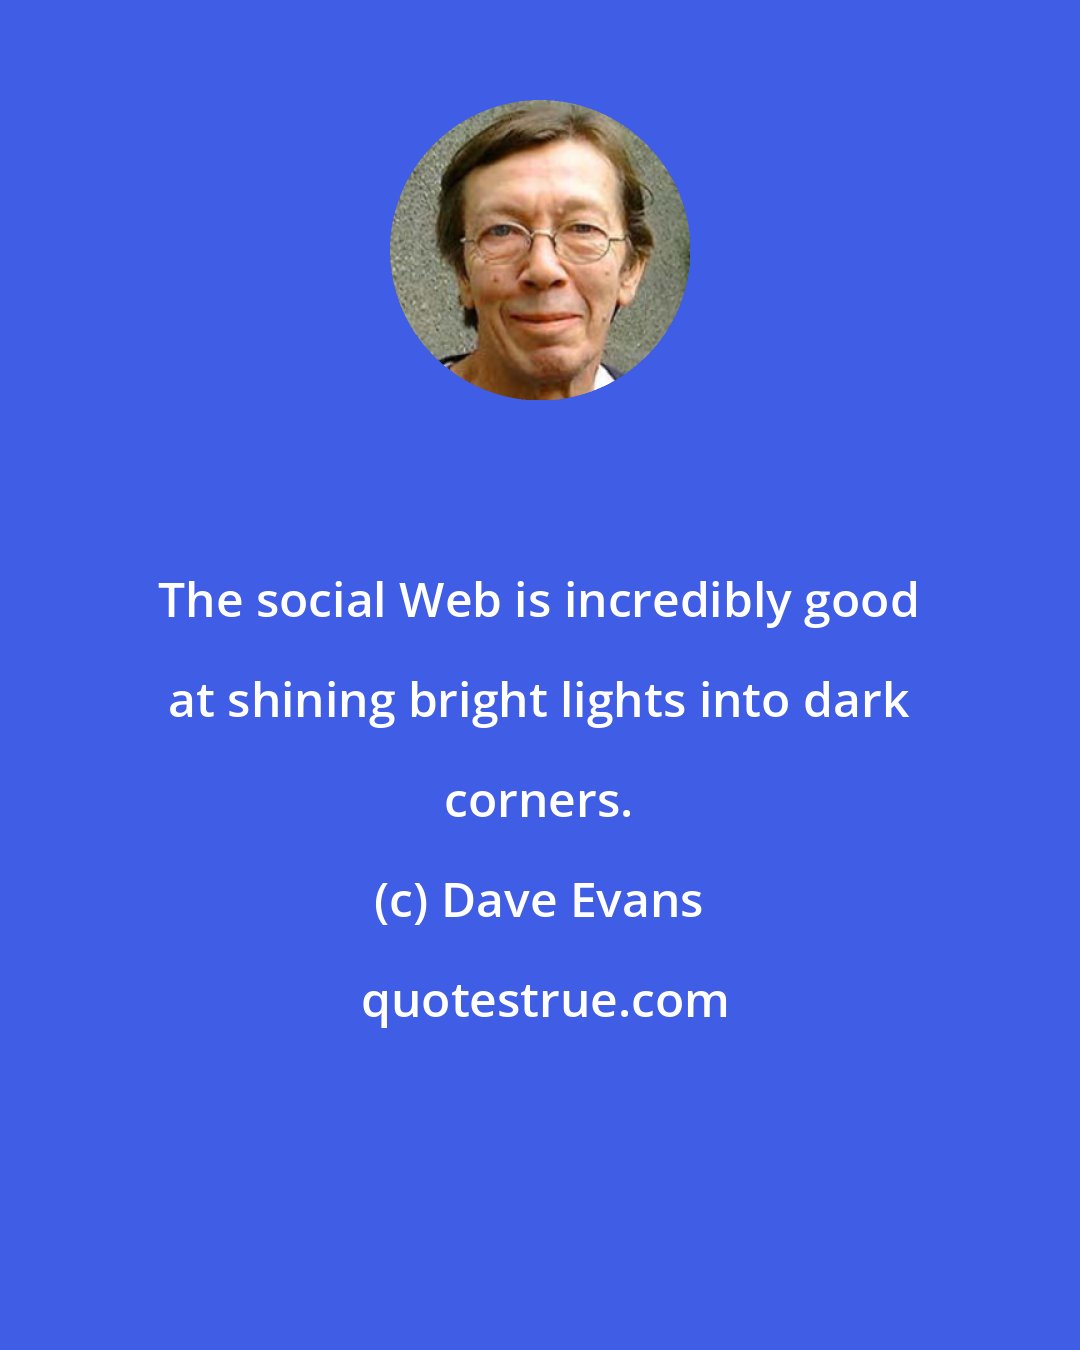 Dave Evans: The social Web is incredibly good at shining bright lights into dark corners.